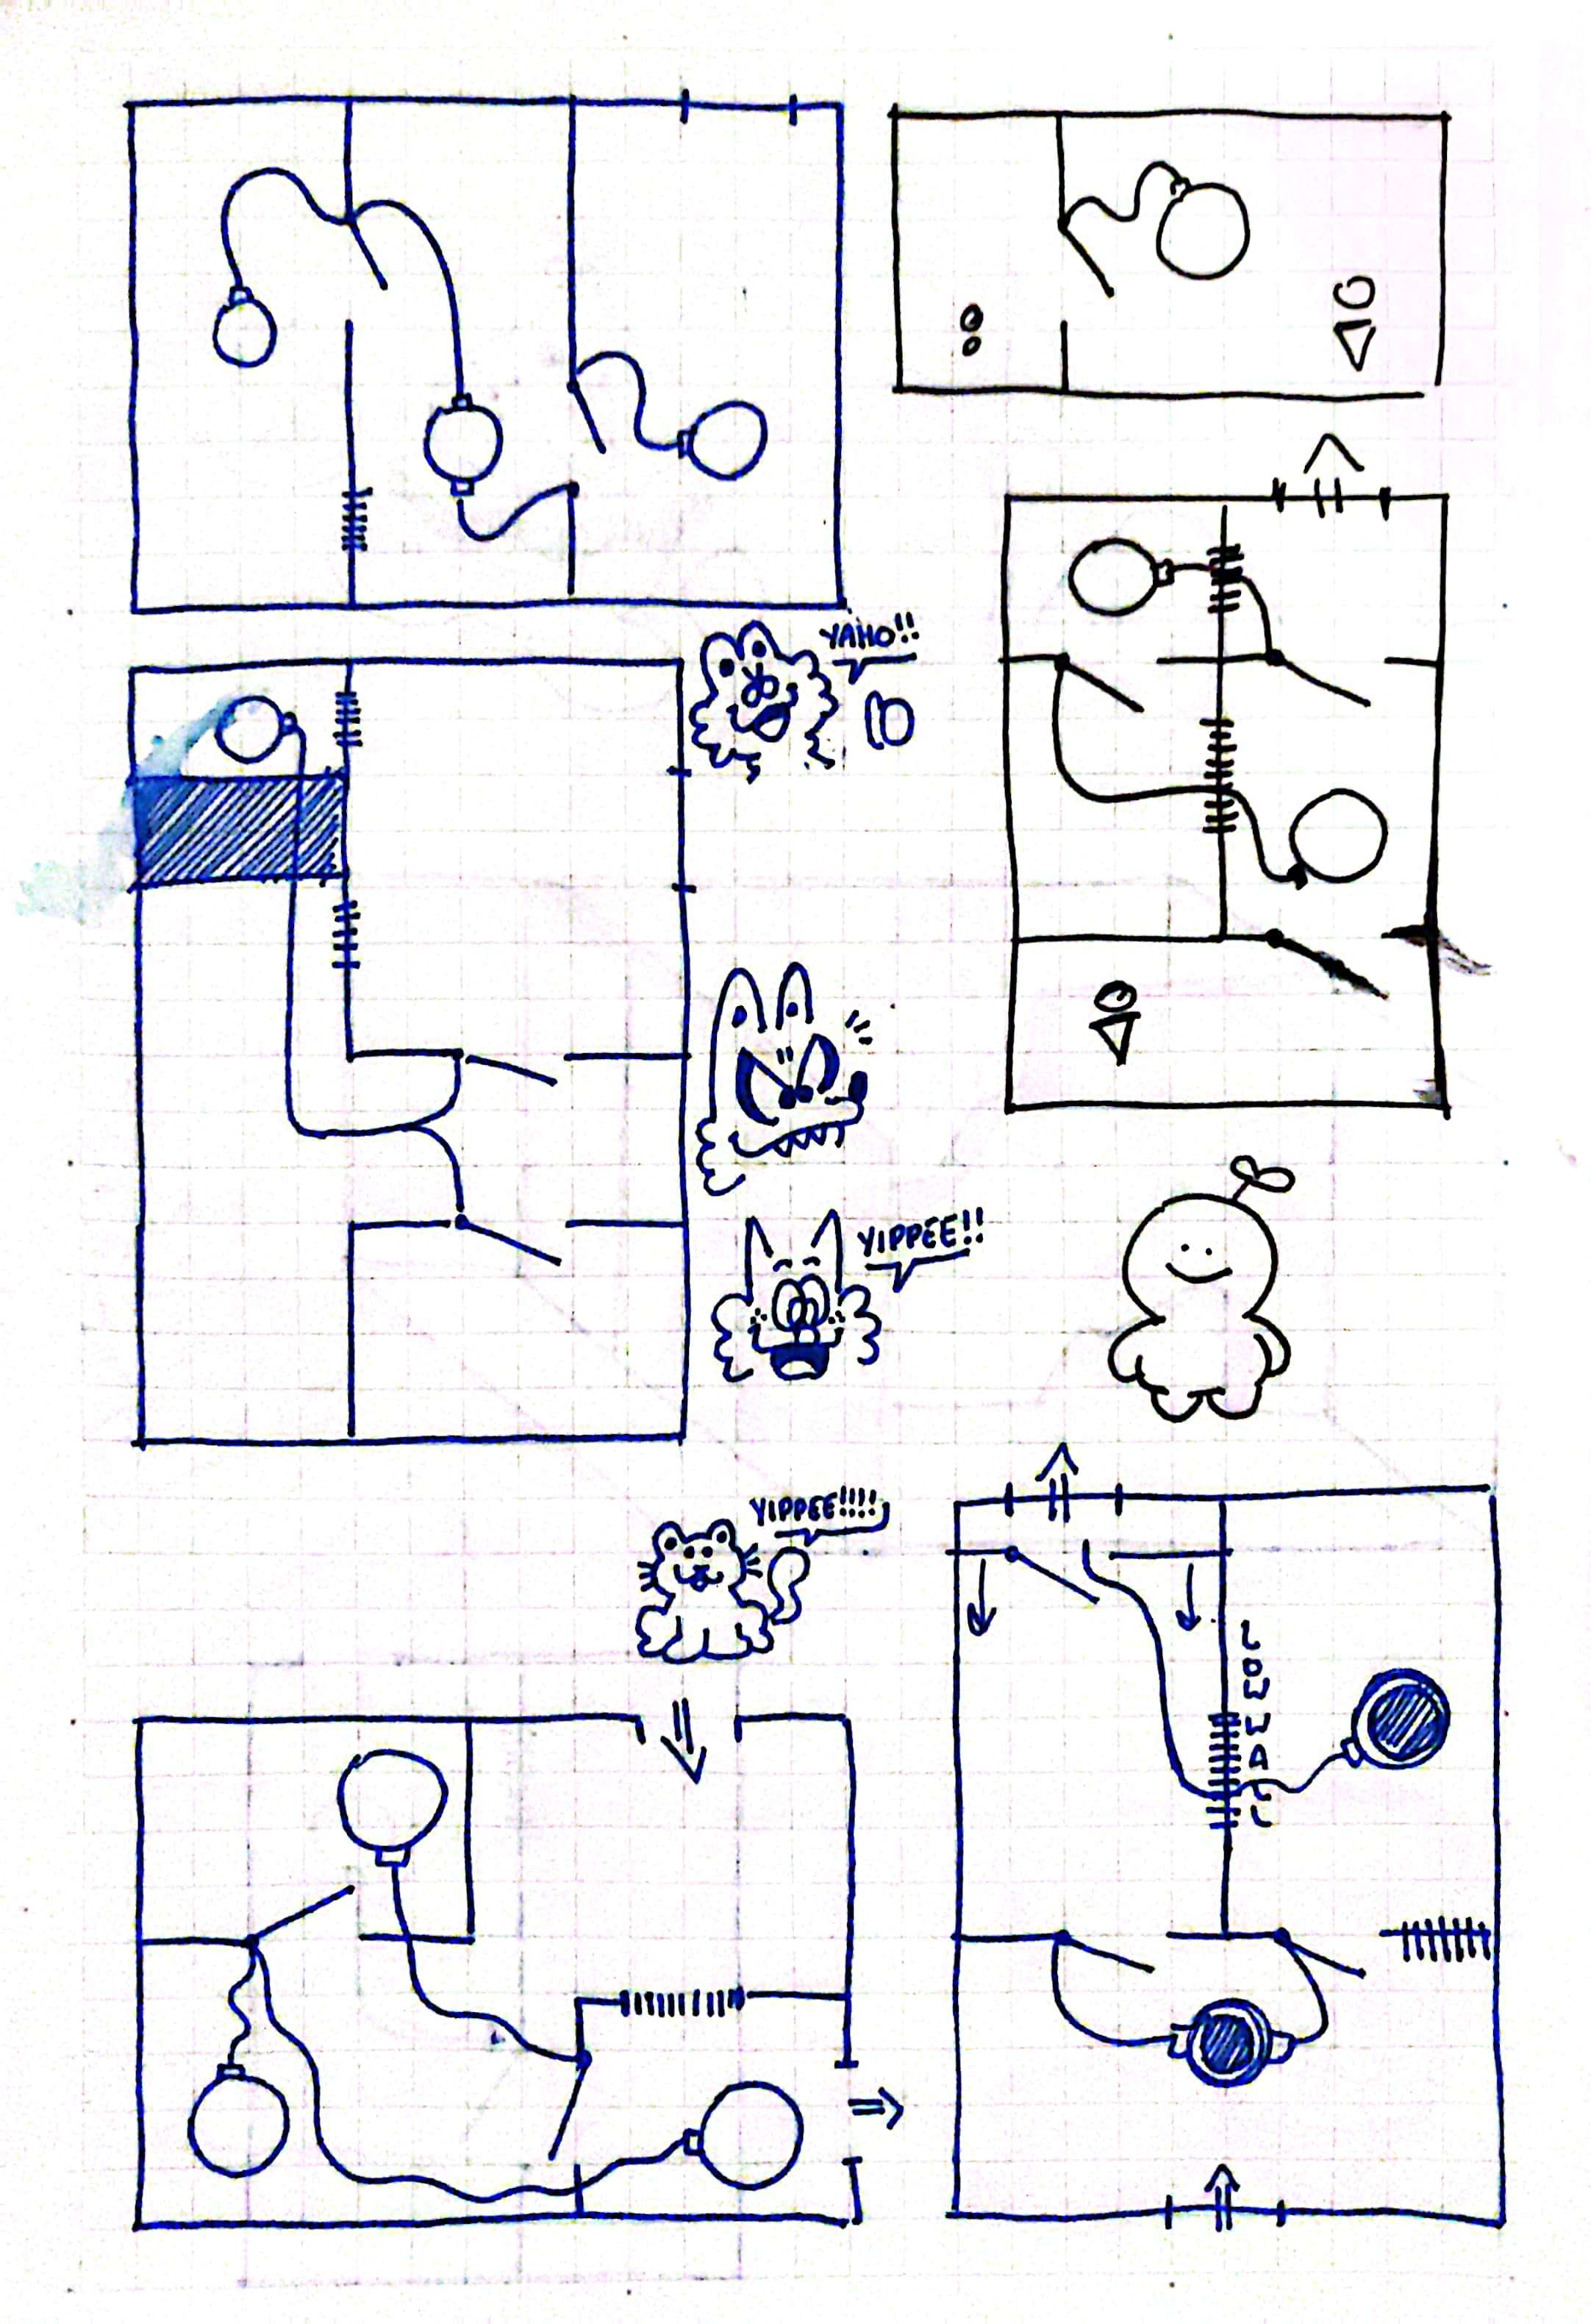 A scan of my sketchbook, showing multiple top-down level sketches